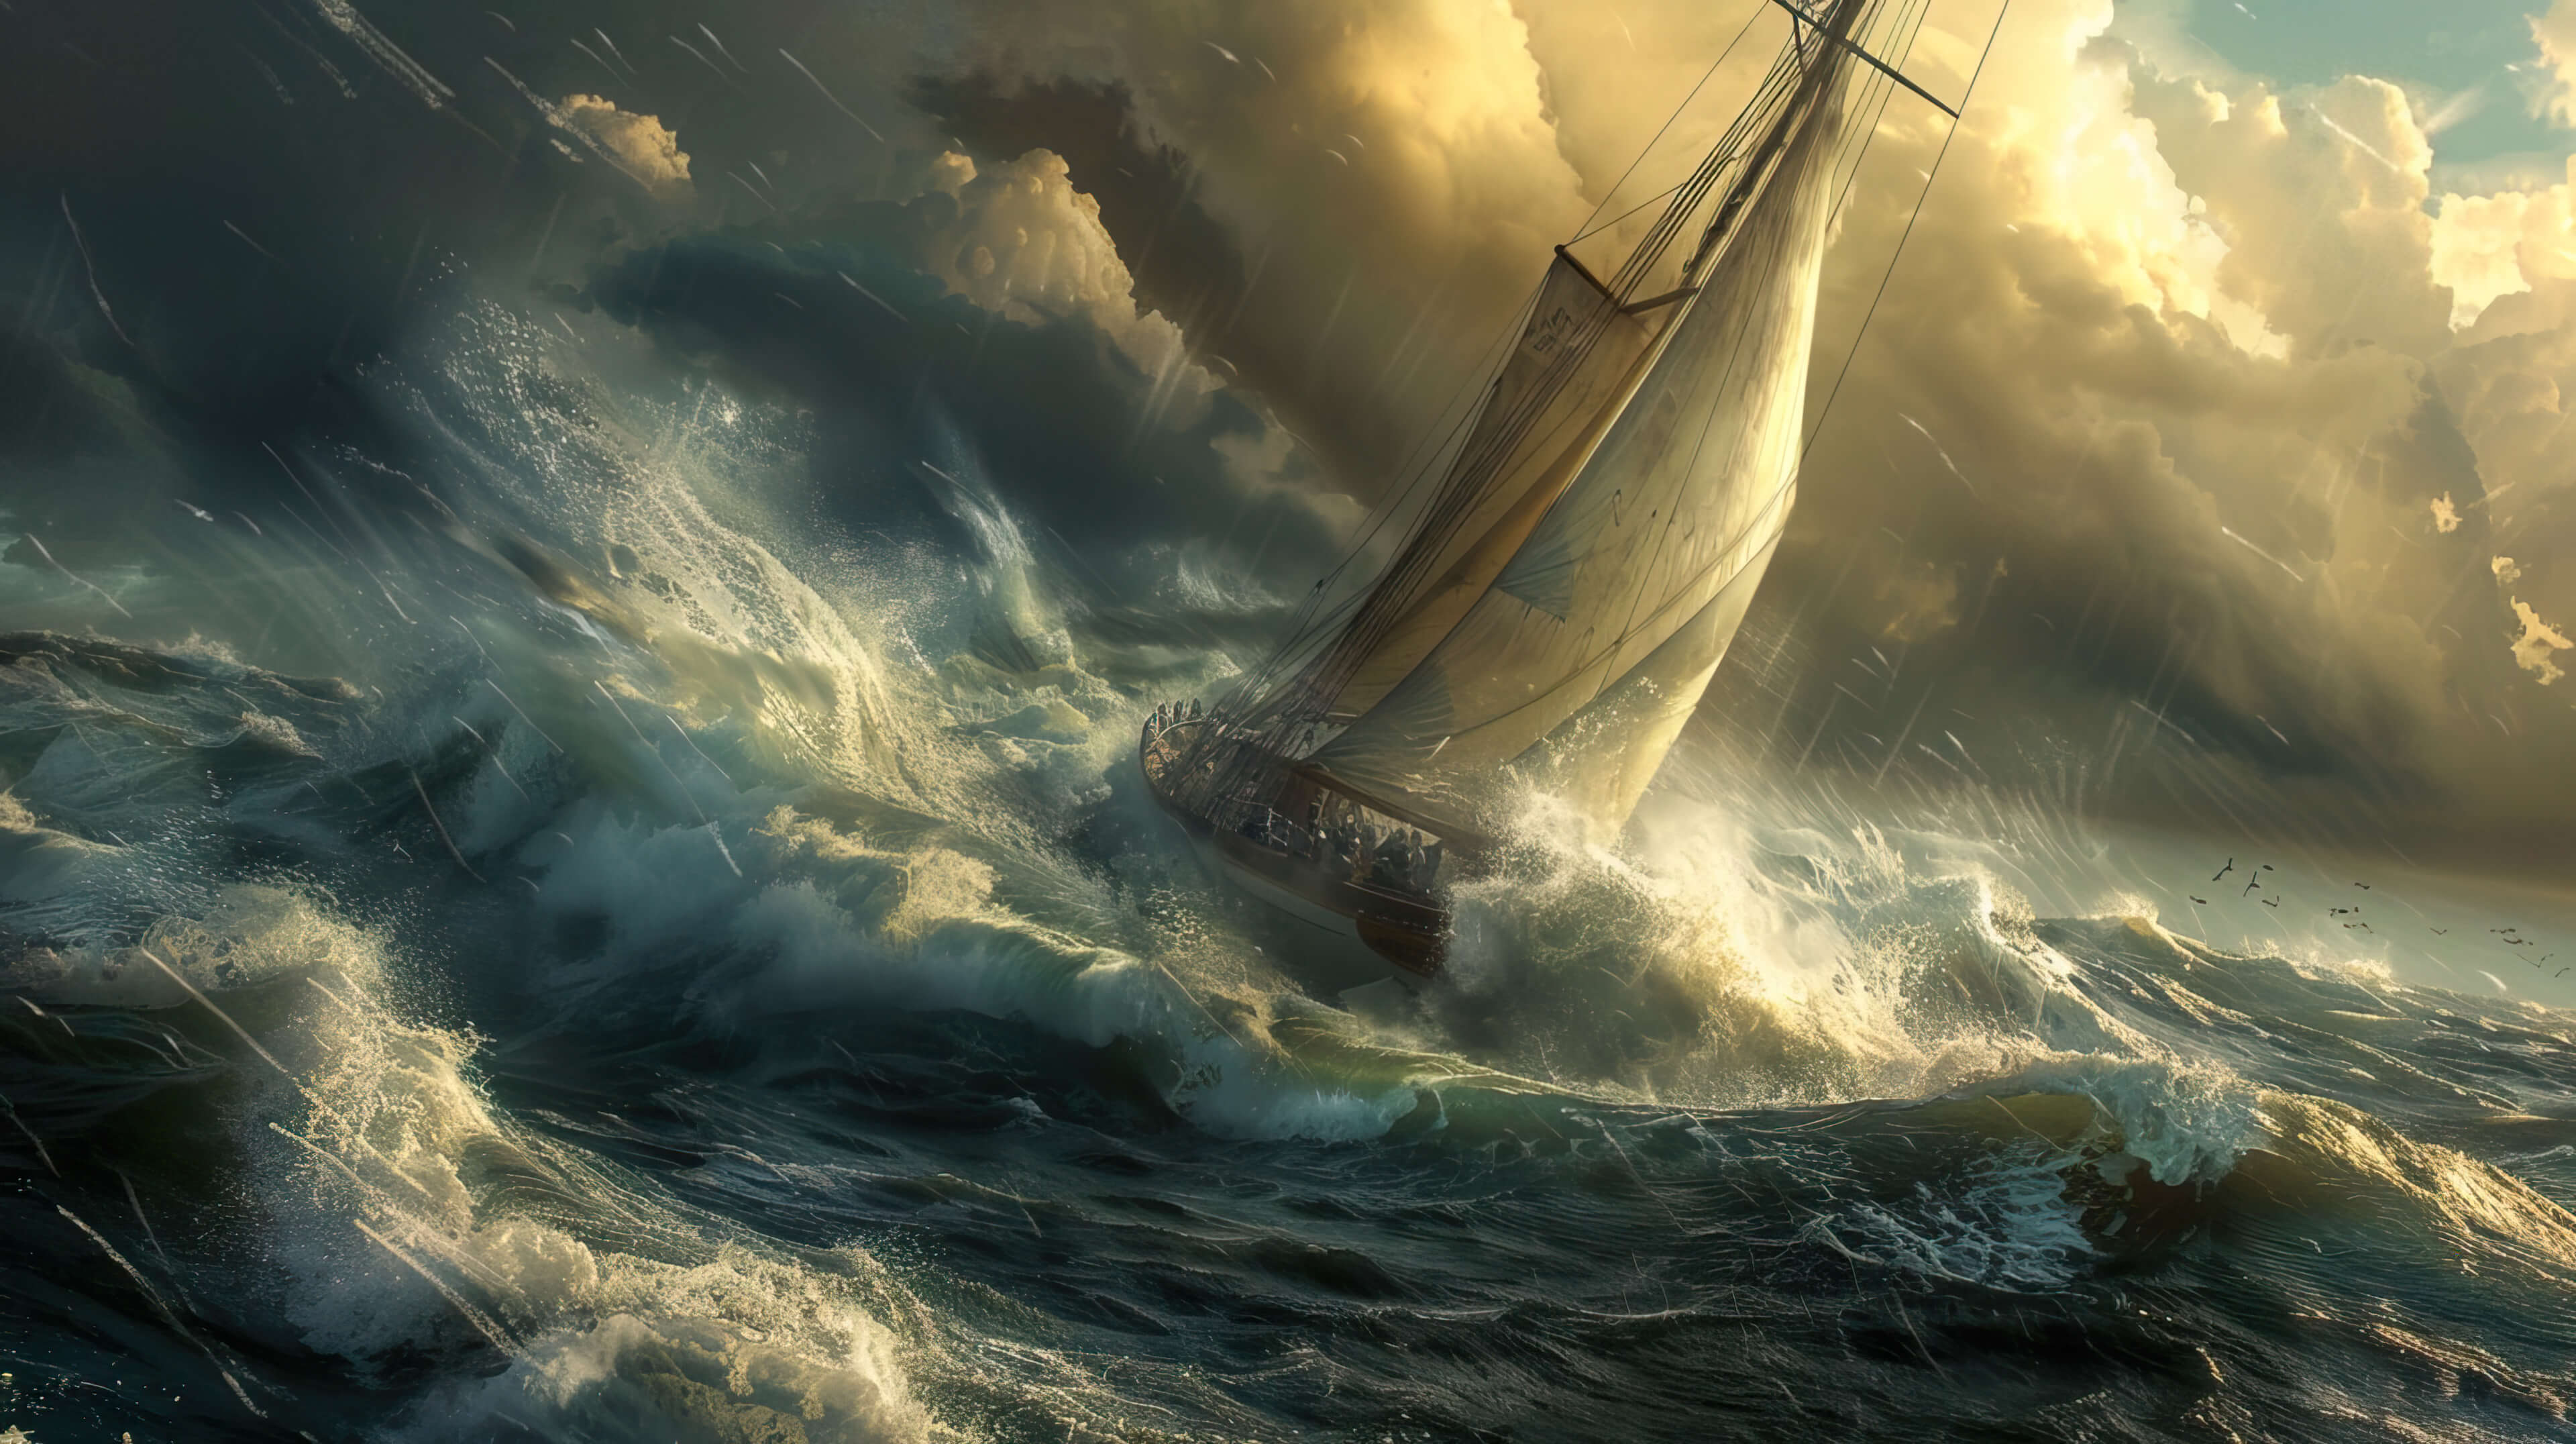 An adventurous scene of a sailboat navigating through stormy seas, its crew bracing against crashing waves and whipping winds